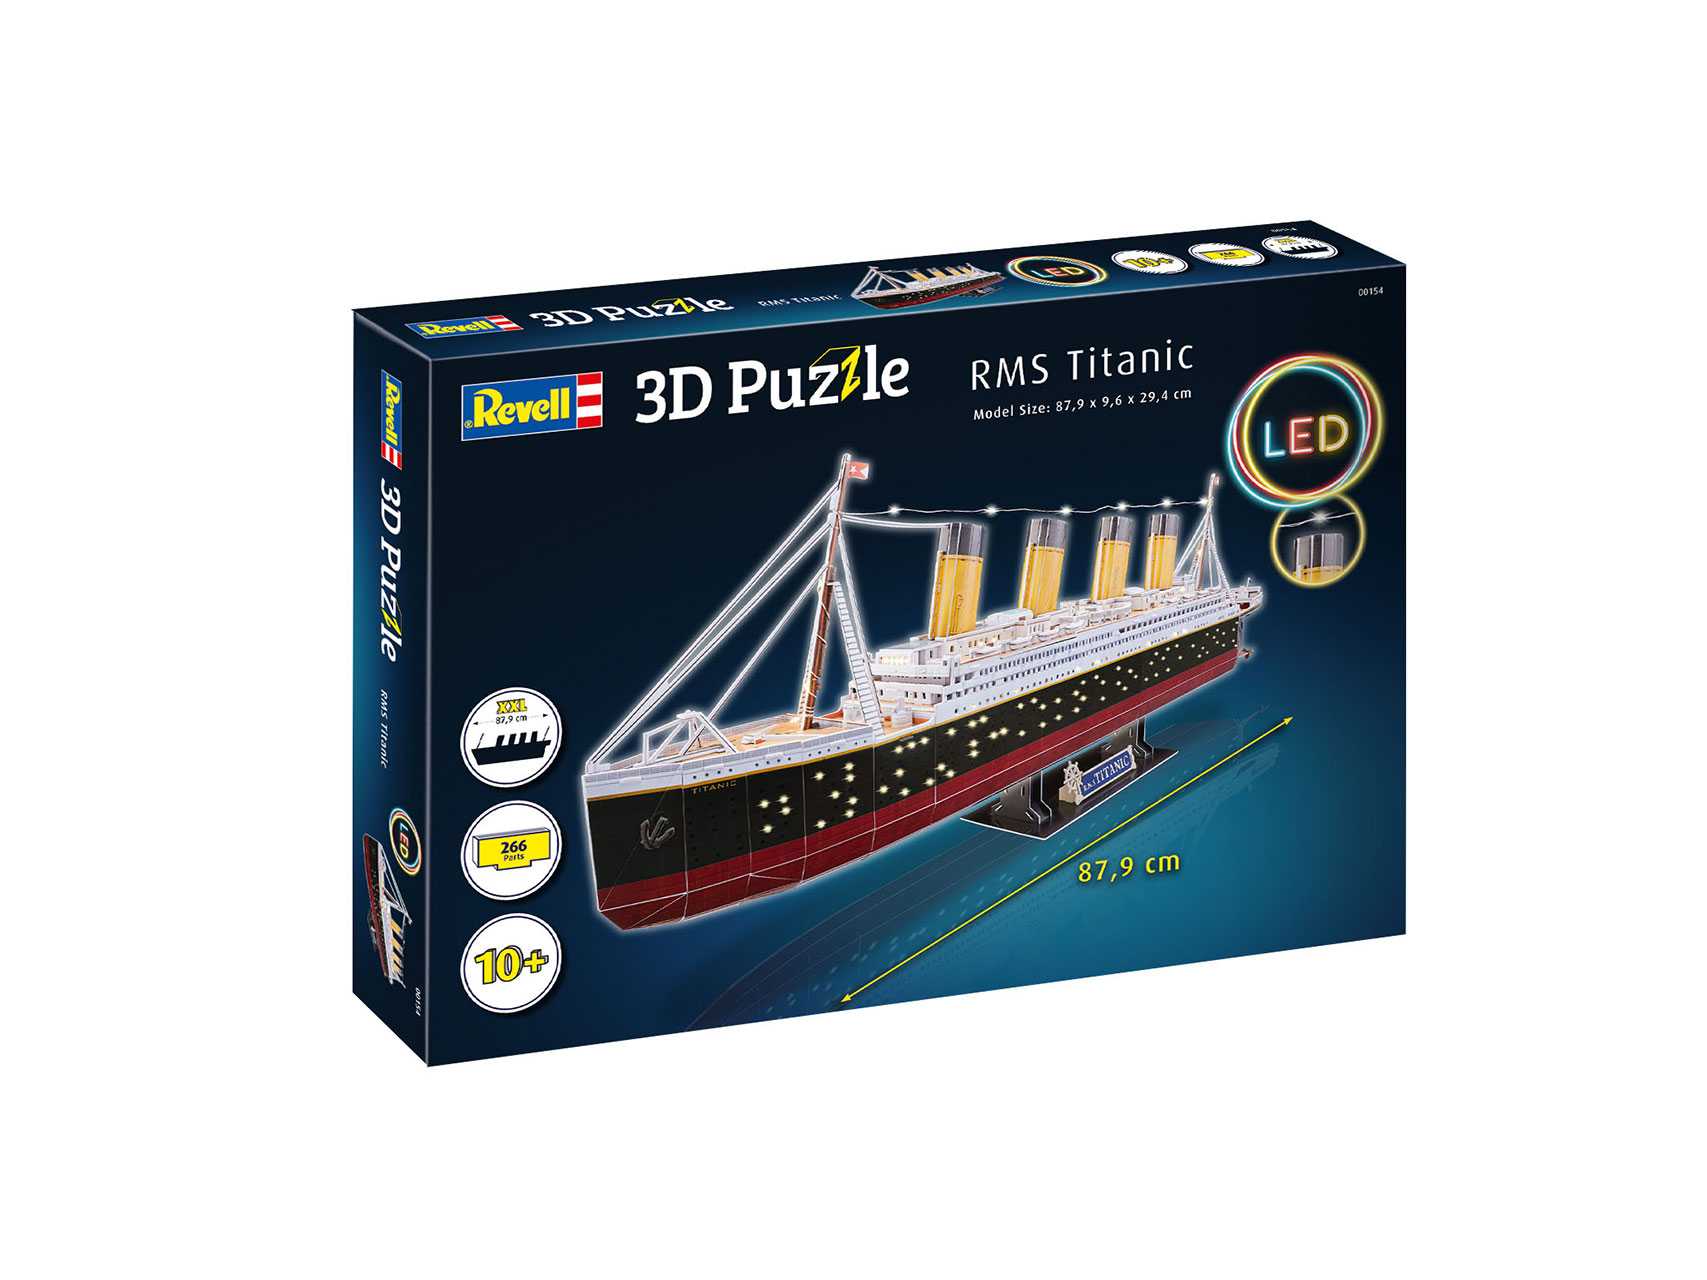 3D PuzzleRevell 00154 - RMS Titanic (LED Edition)